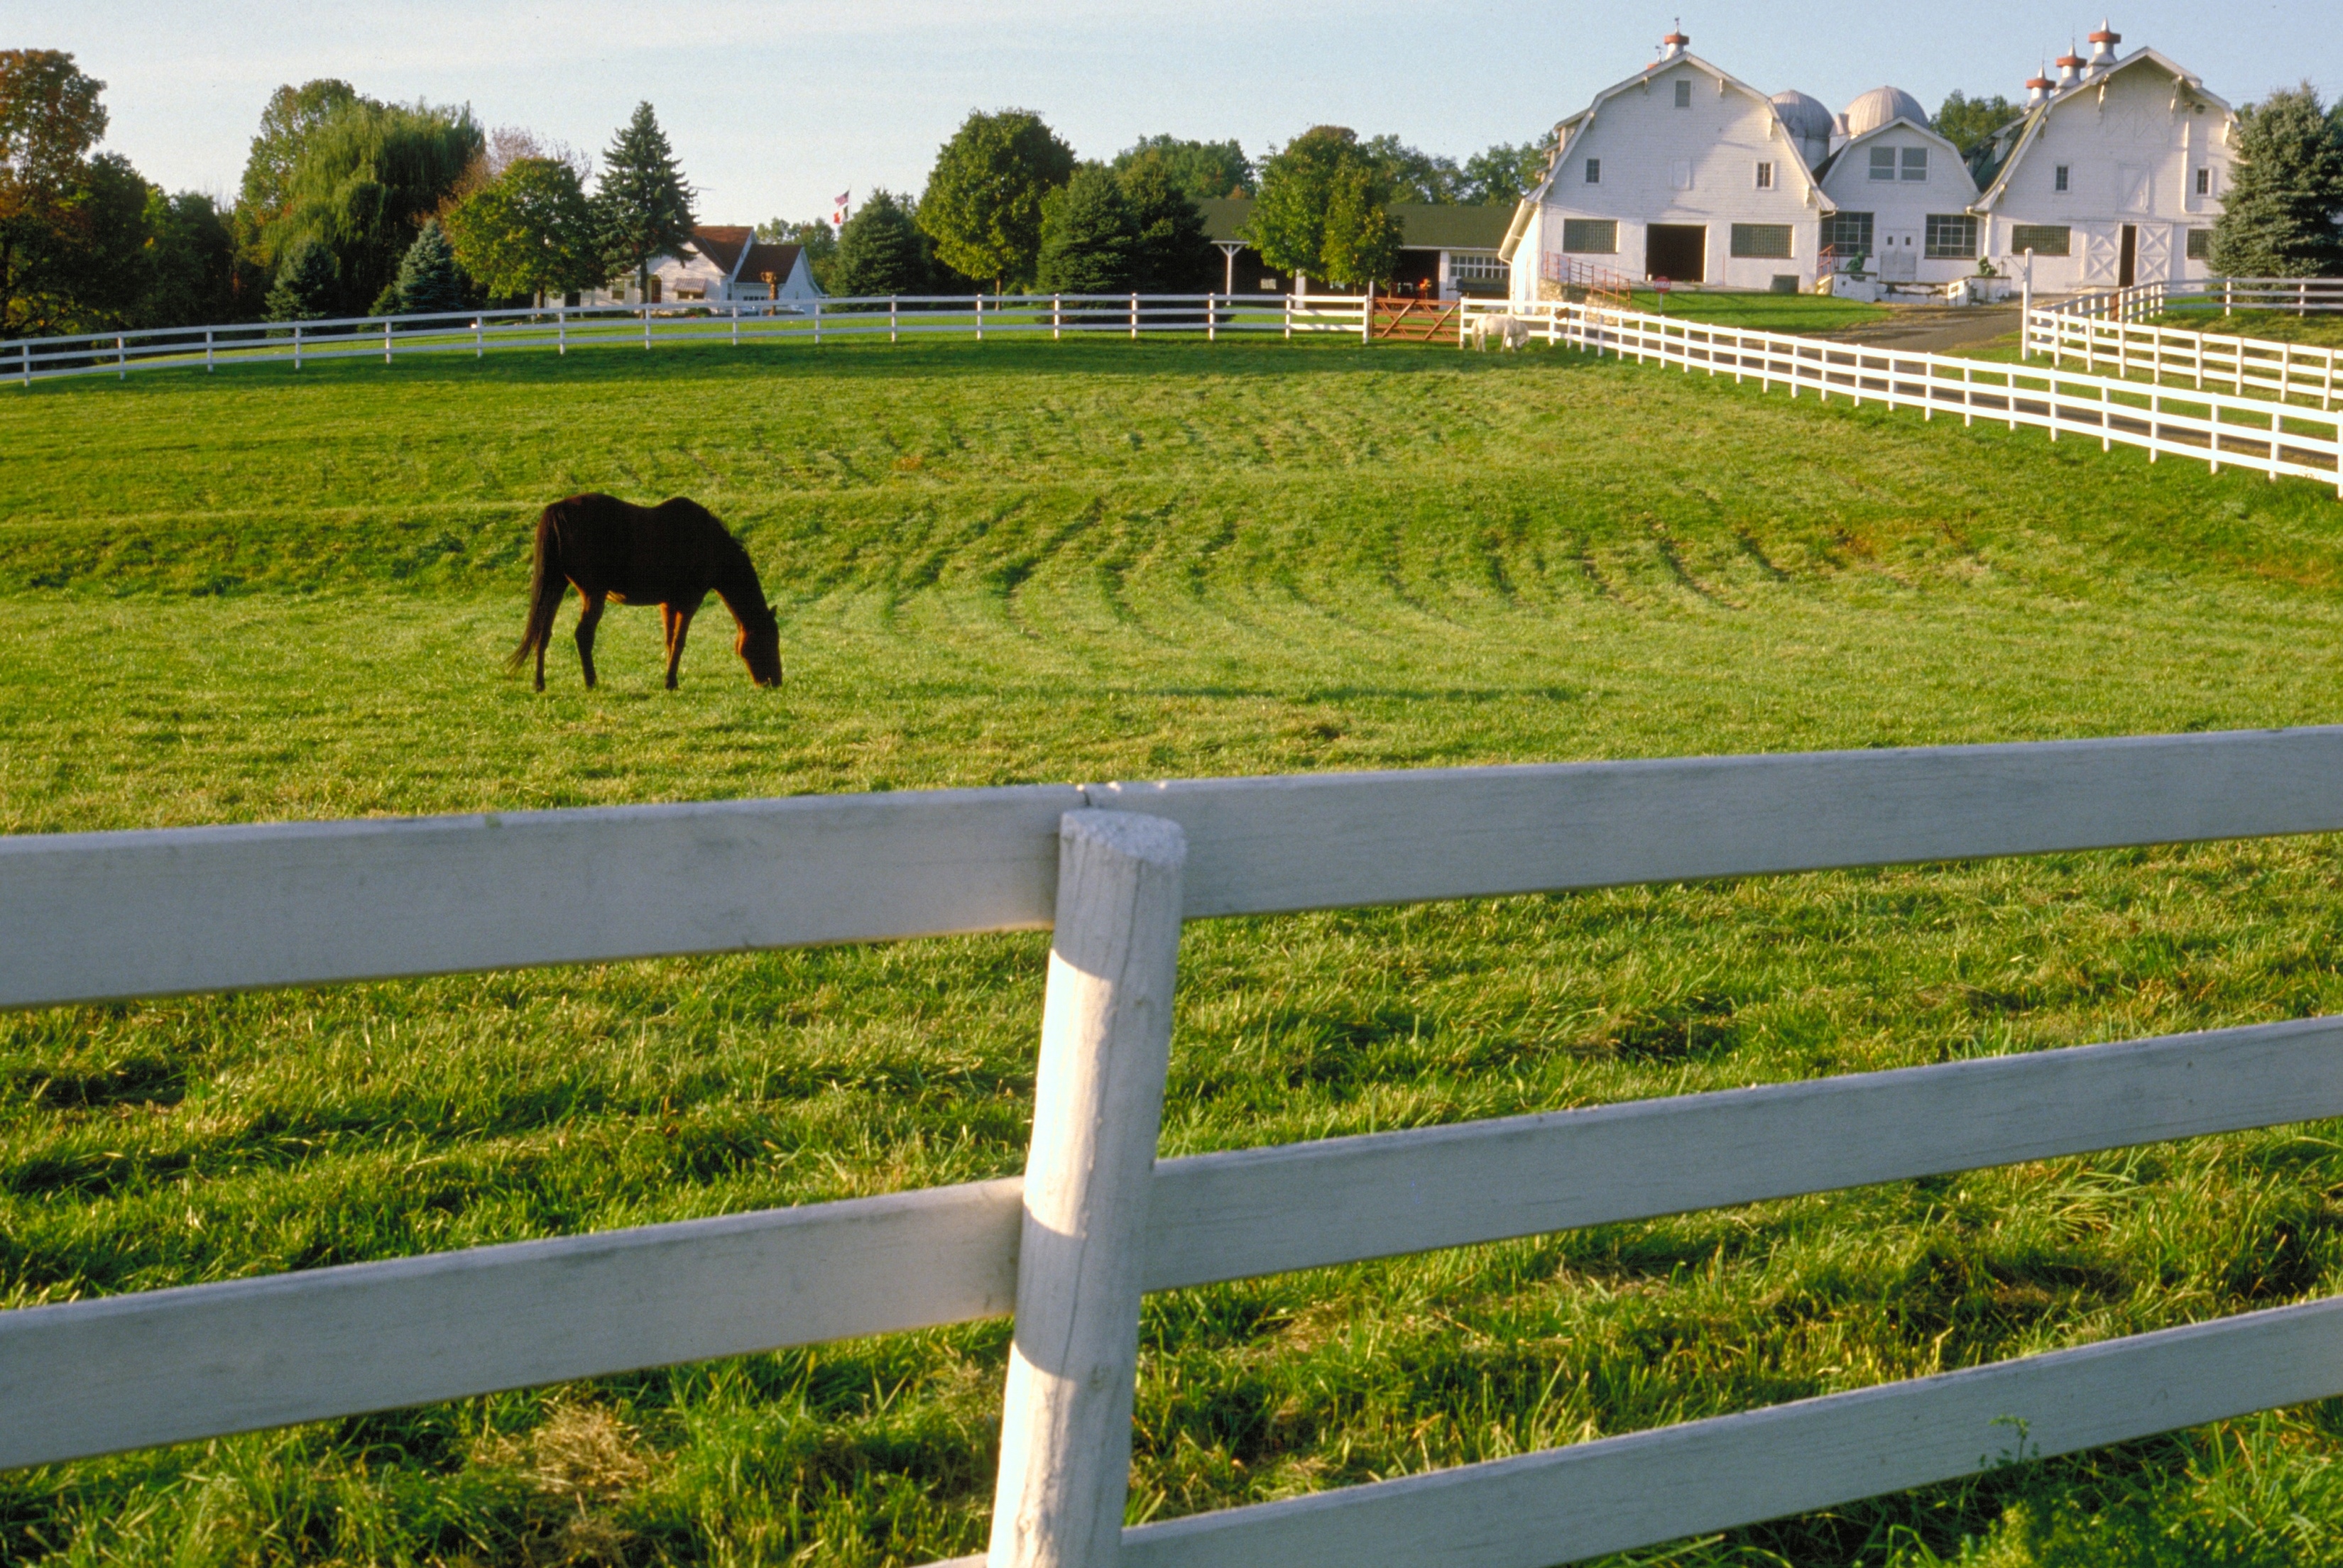 Where Can I Learn About Operating My Own Horse Farm? – The Horse